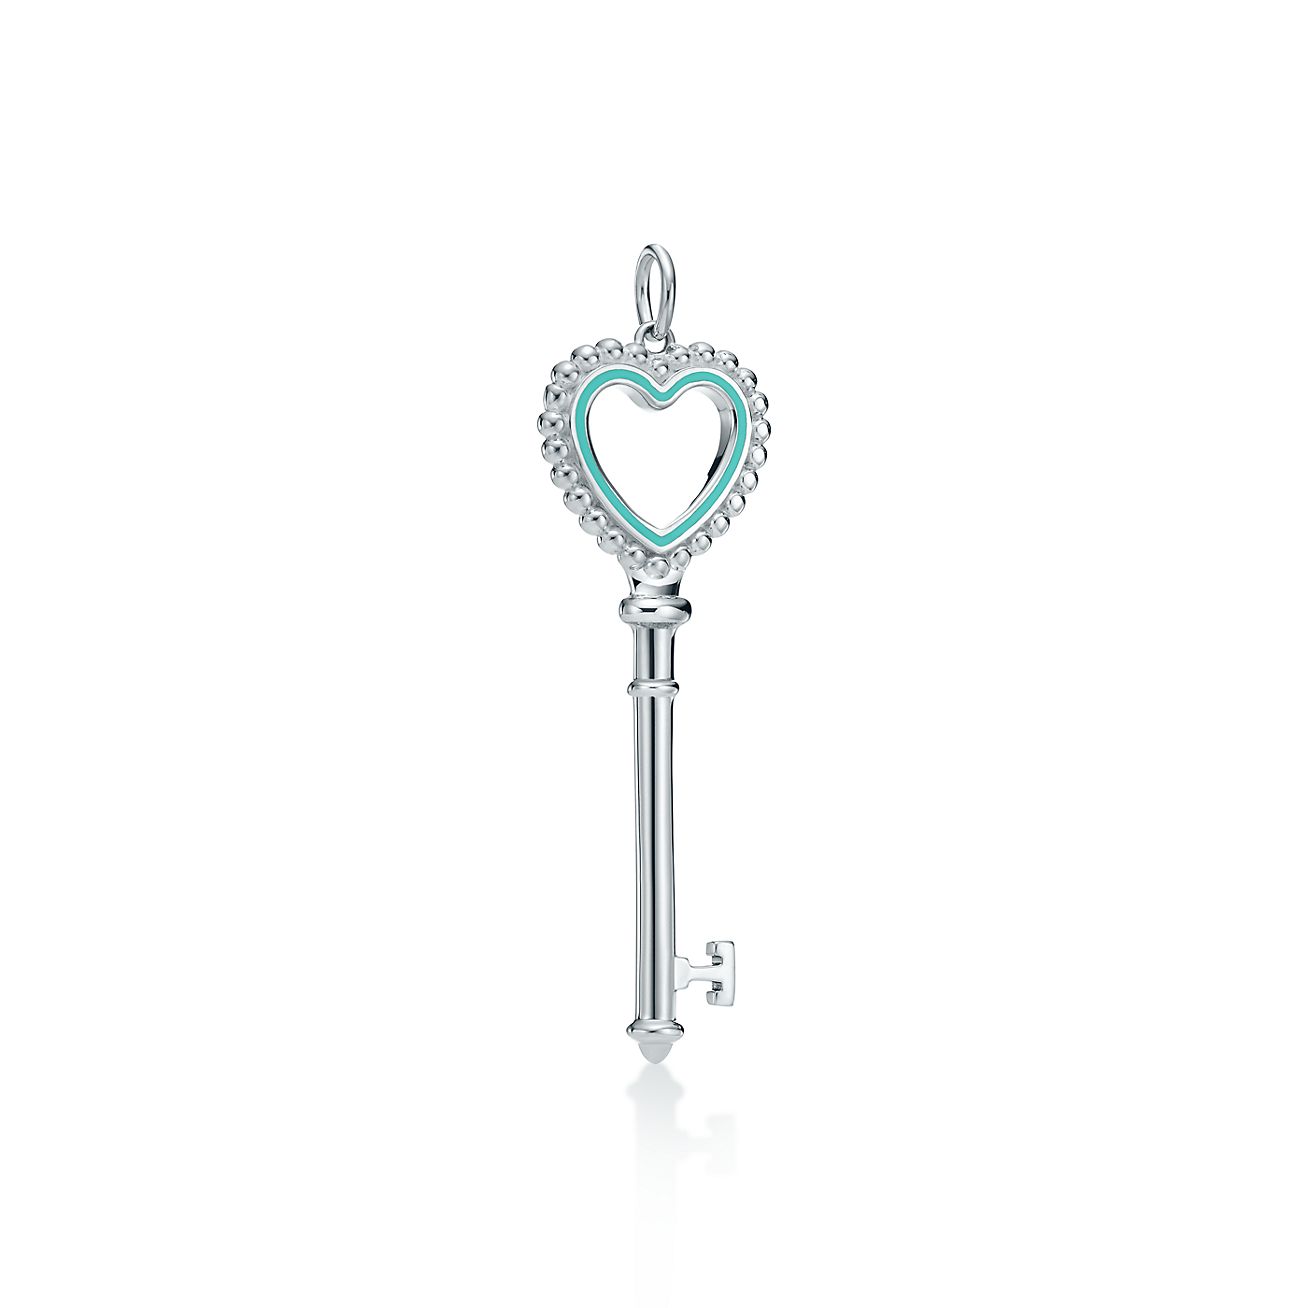 tiffany blue and silver heart necklace